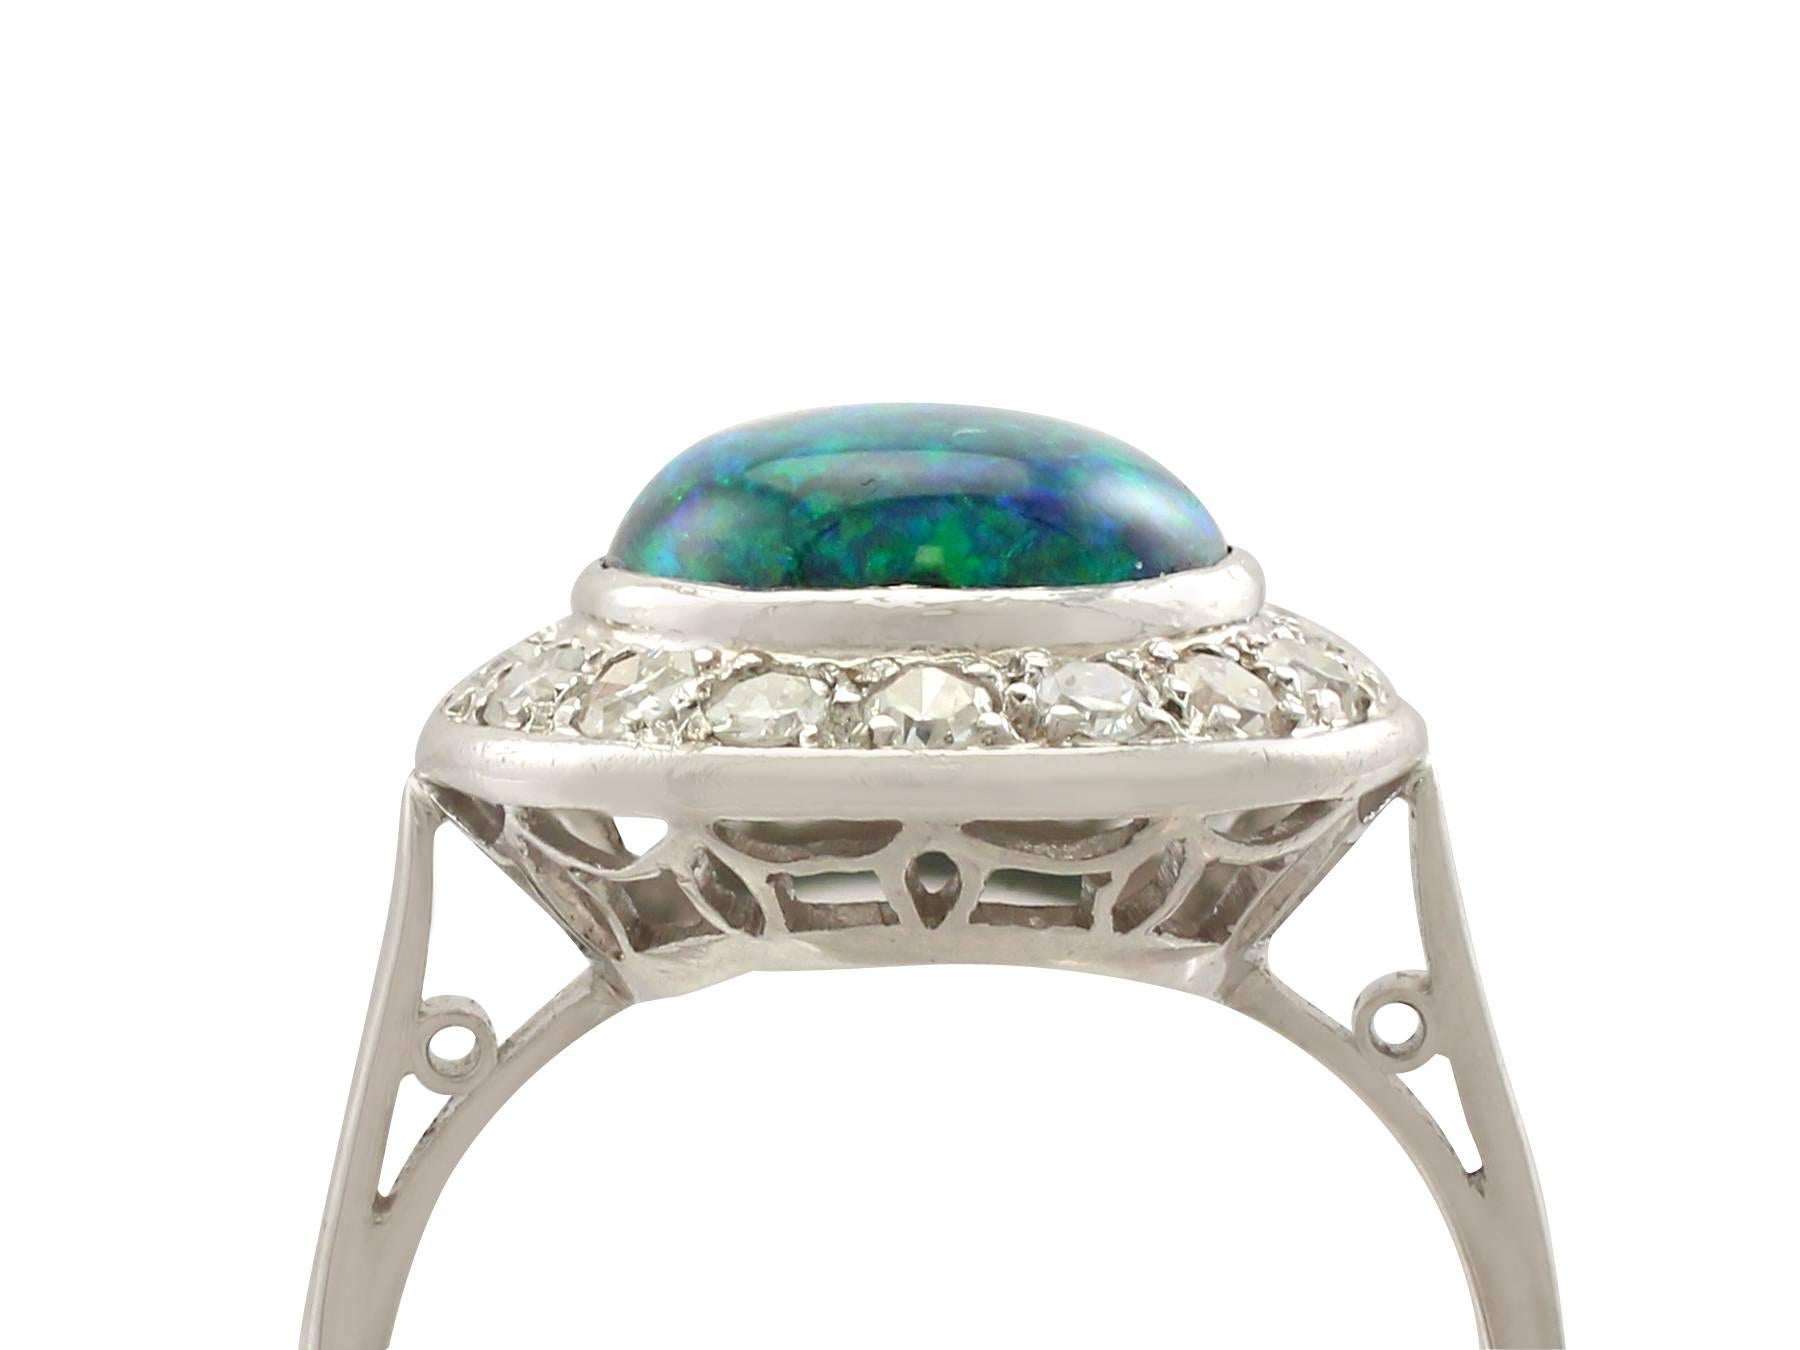 A stunning antique 1.30 carat black opal and 0.28 carat diamond, platinum cluster style dress ring; part of our diverse antique jewellery and estate jewelry collections.

This stunning, fine and impressive opal and diamond cluster ring has been